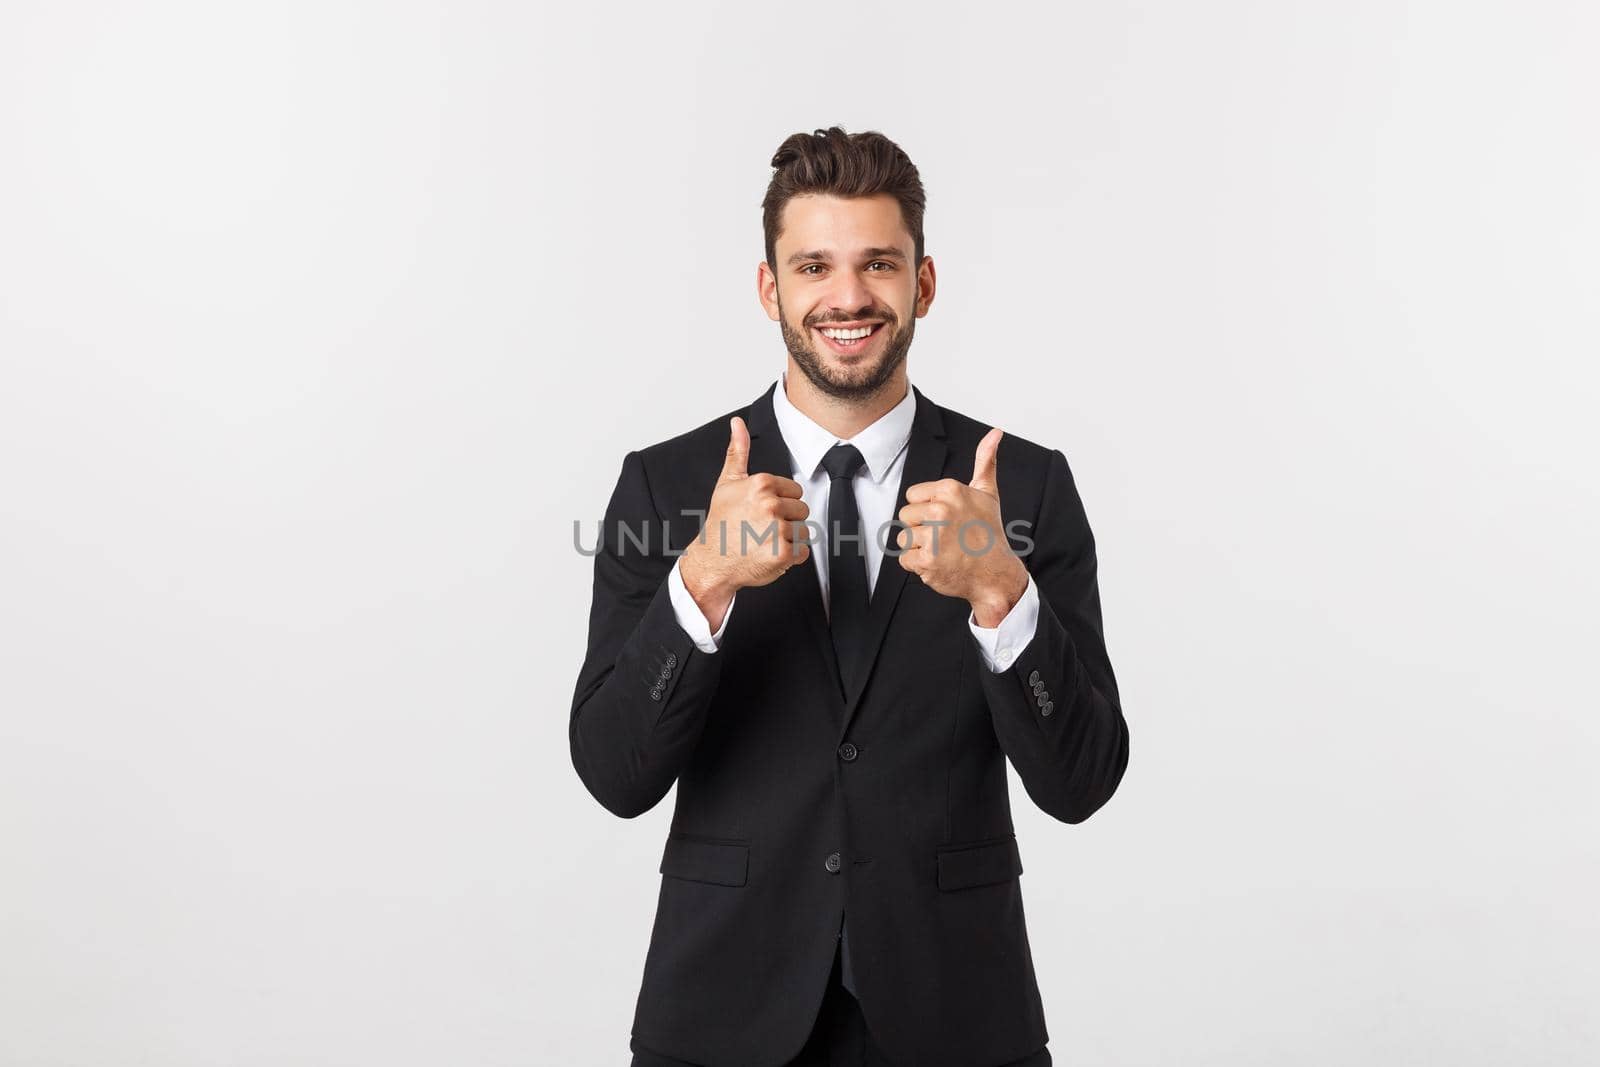 Portrait businessman showing thumbs-up sign on white background.